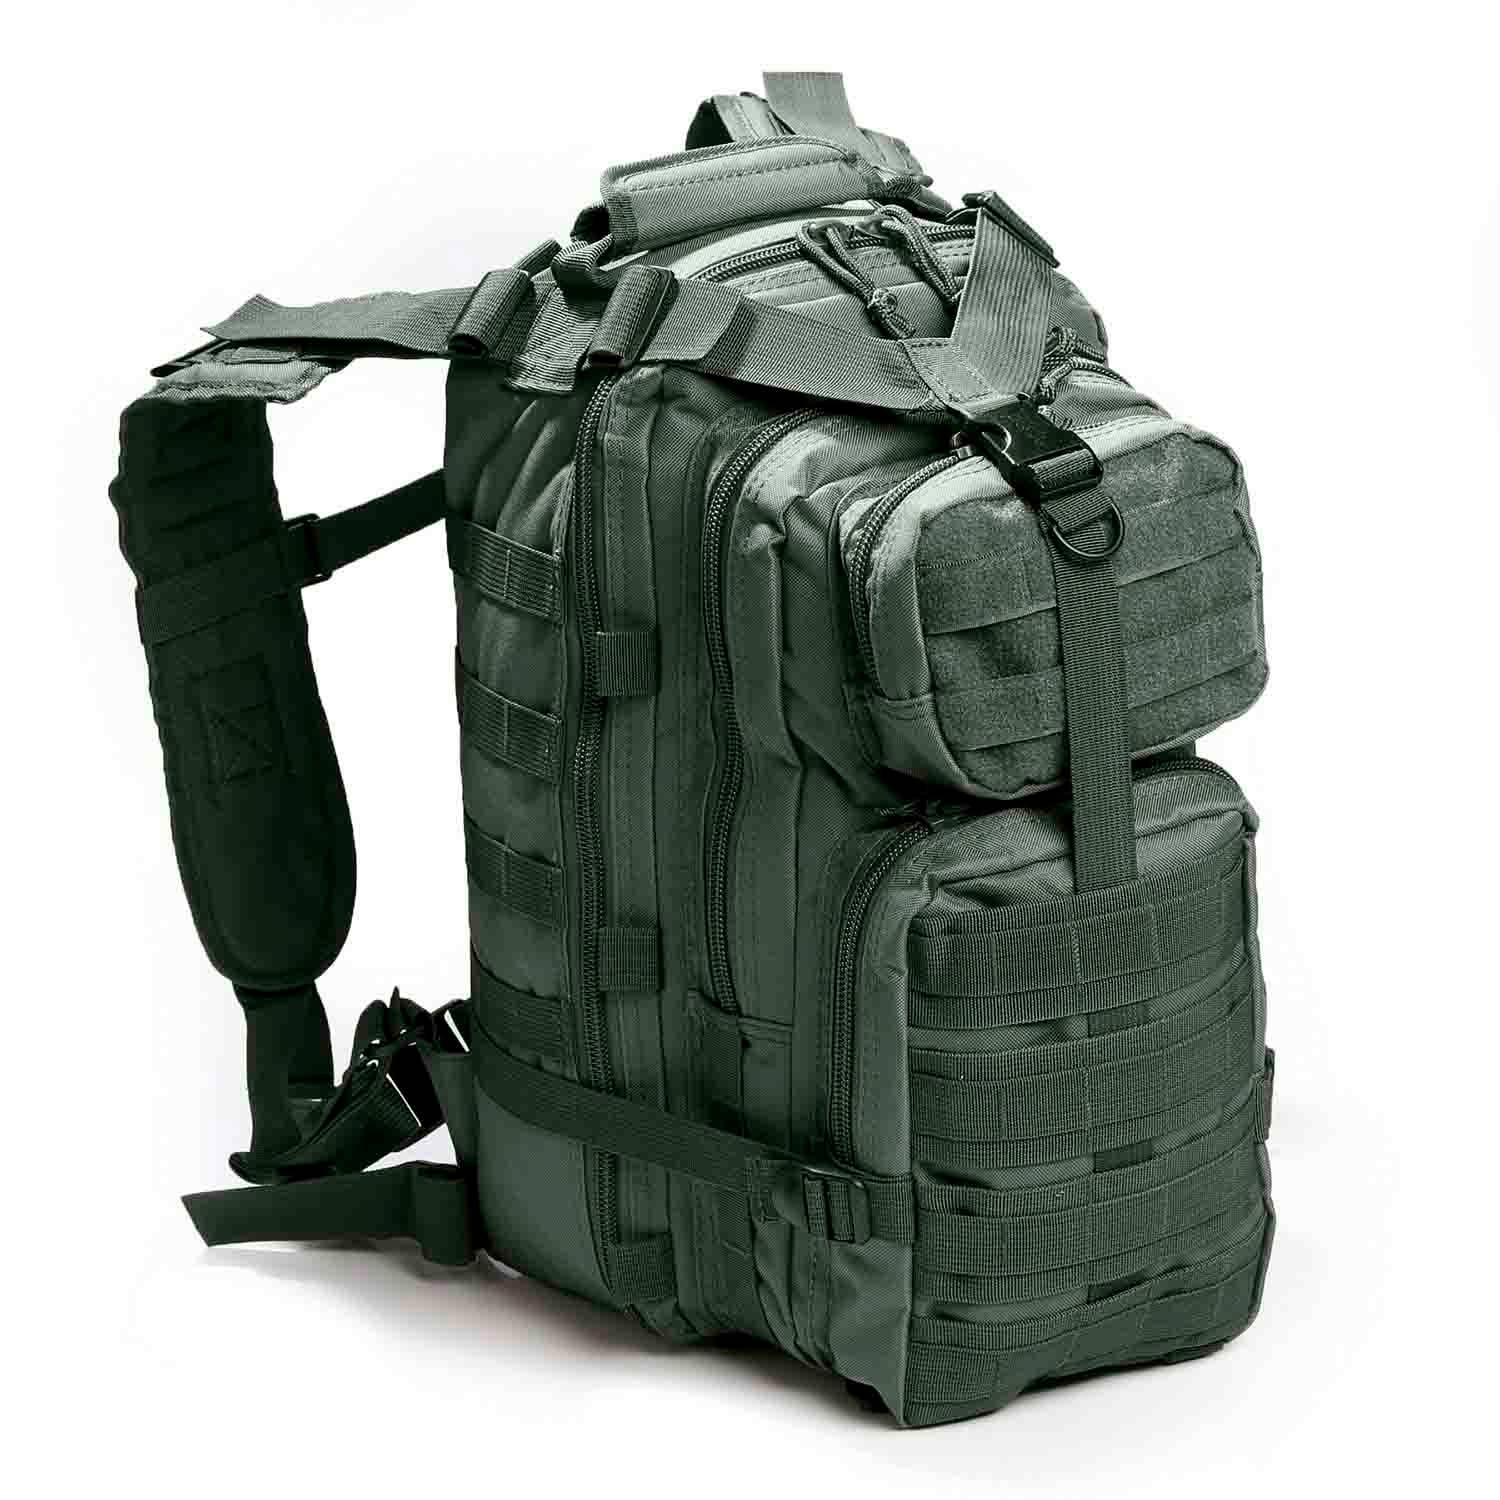 Galls Tactical Backpack | 2-Day Backpack MOLLE